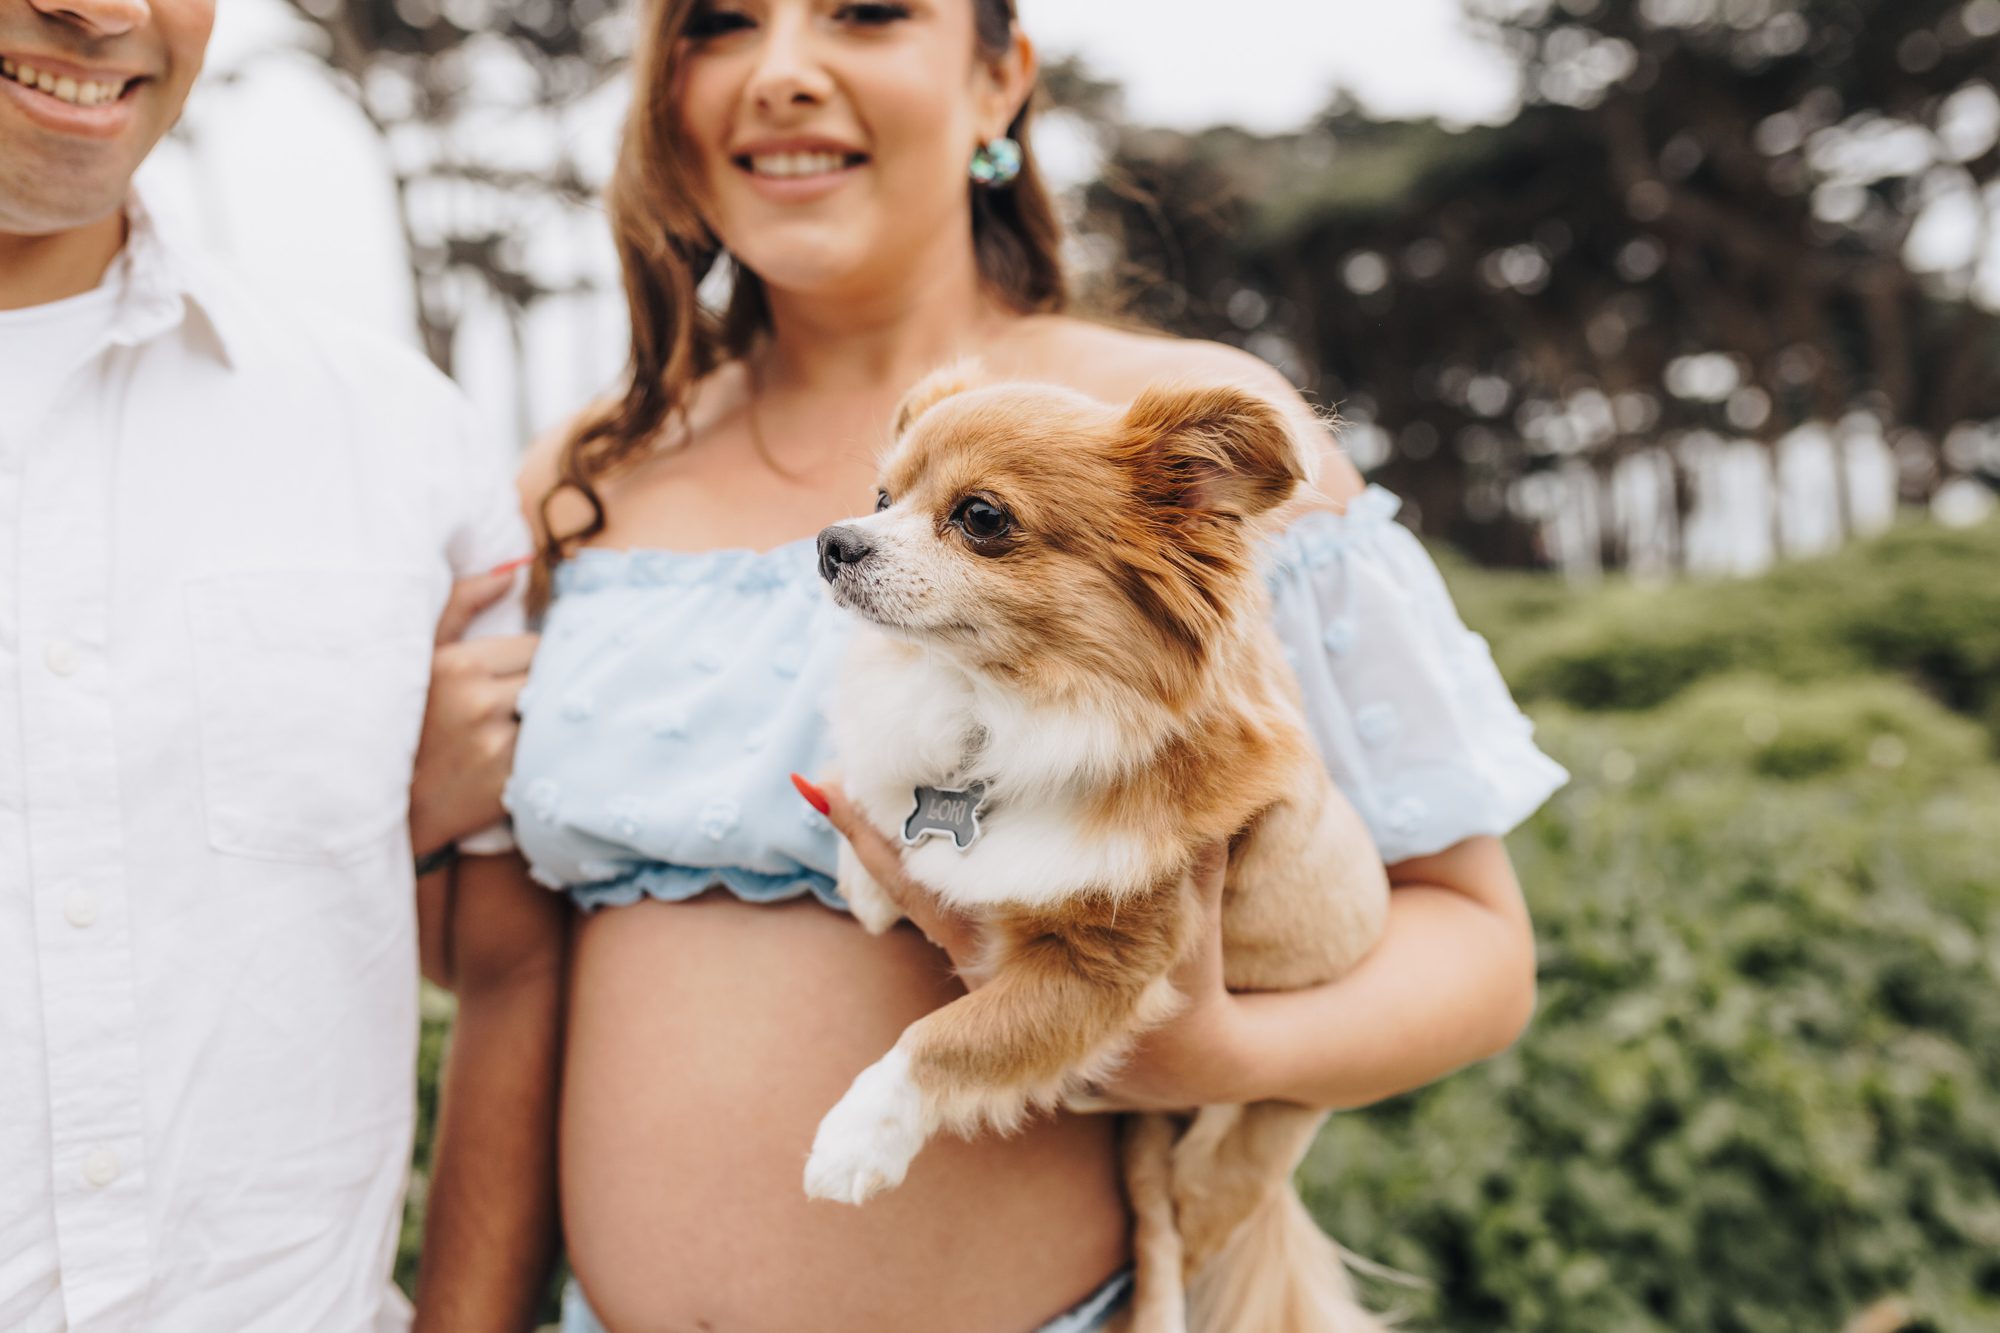 A small dog is held by it's owner at a Maternity Session at Lands End, San Francisco